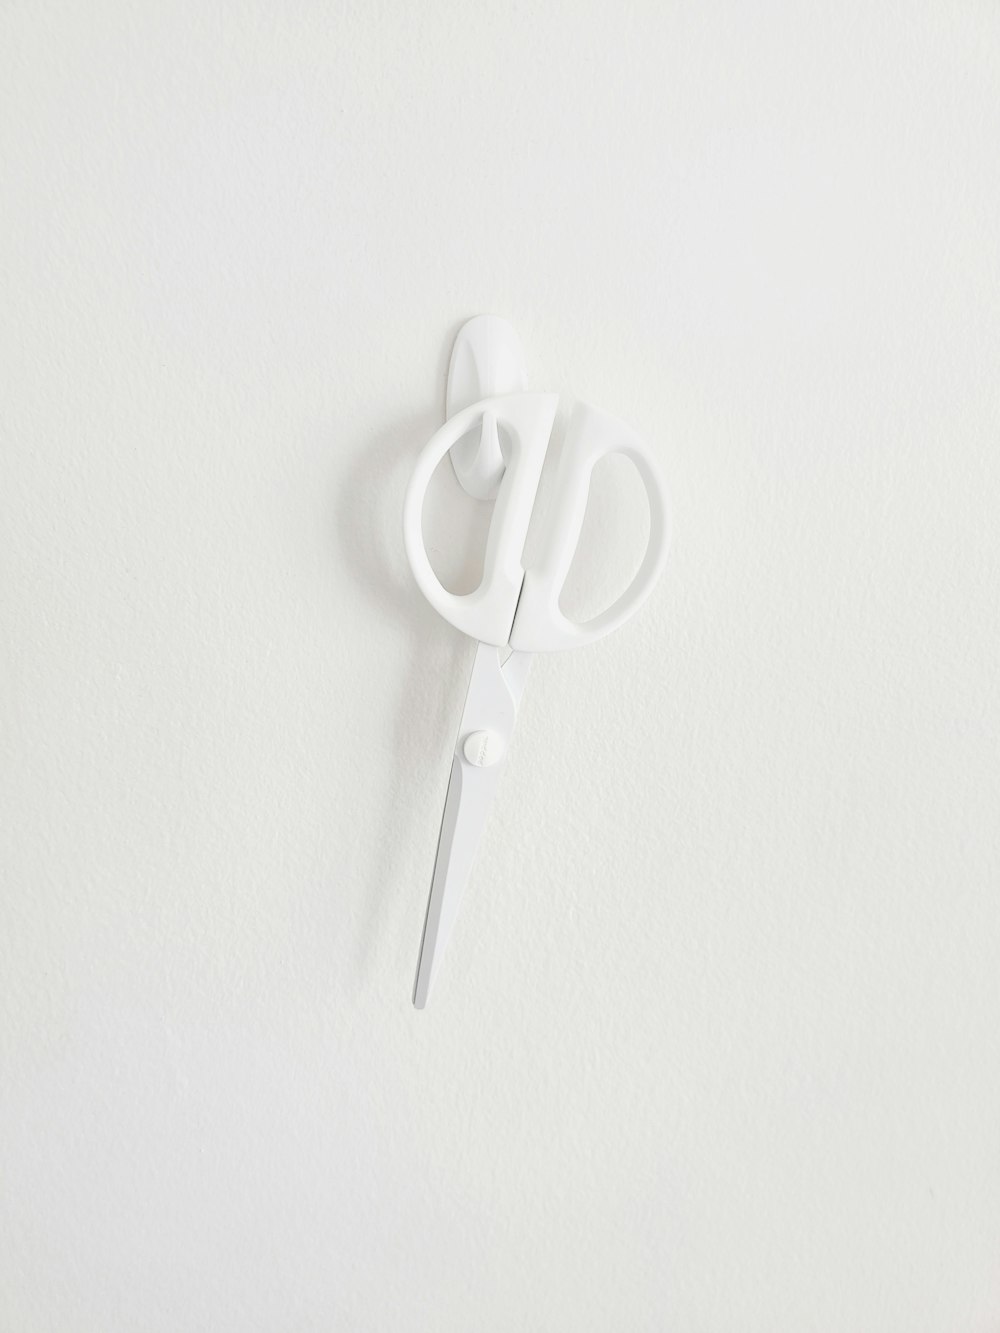 white plastic clothes pin on white surface